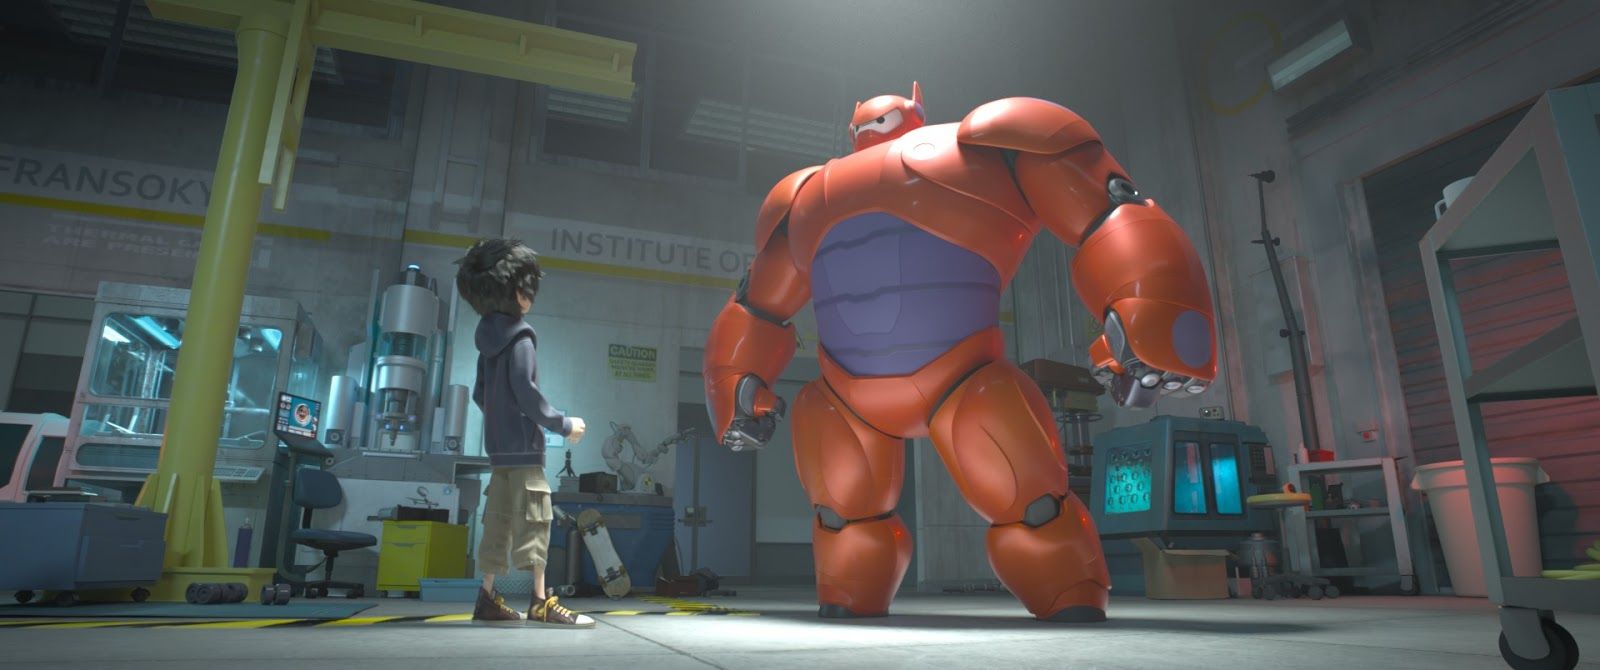 Geek insider, geekinsider, geekinsider. Com,, big hero 6 will be disney's next big hit in japan, entertainment